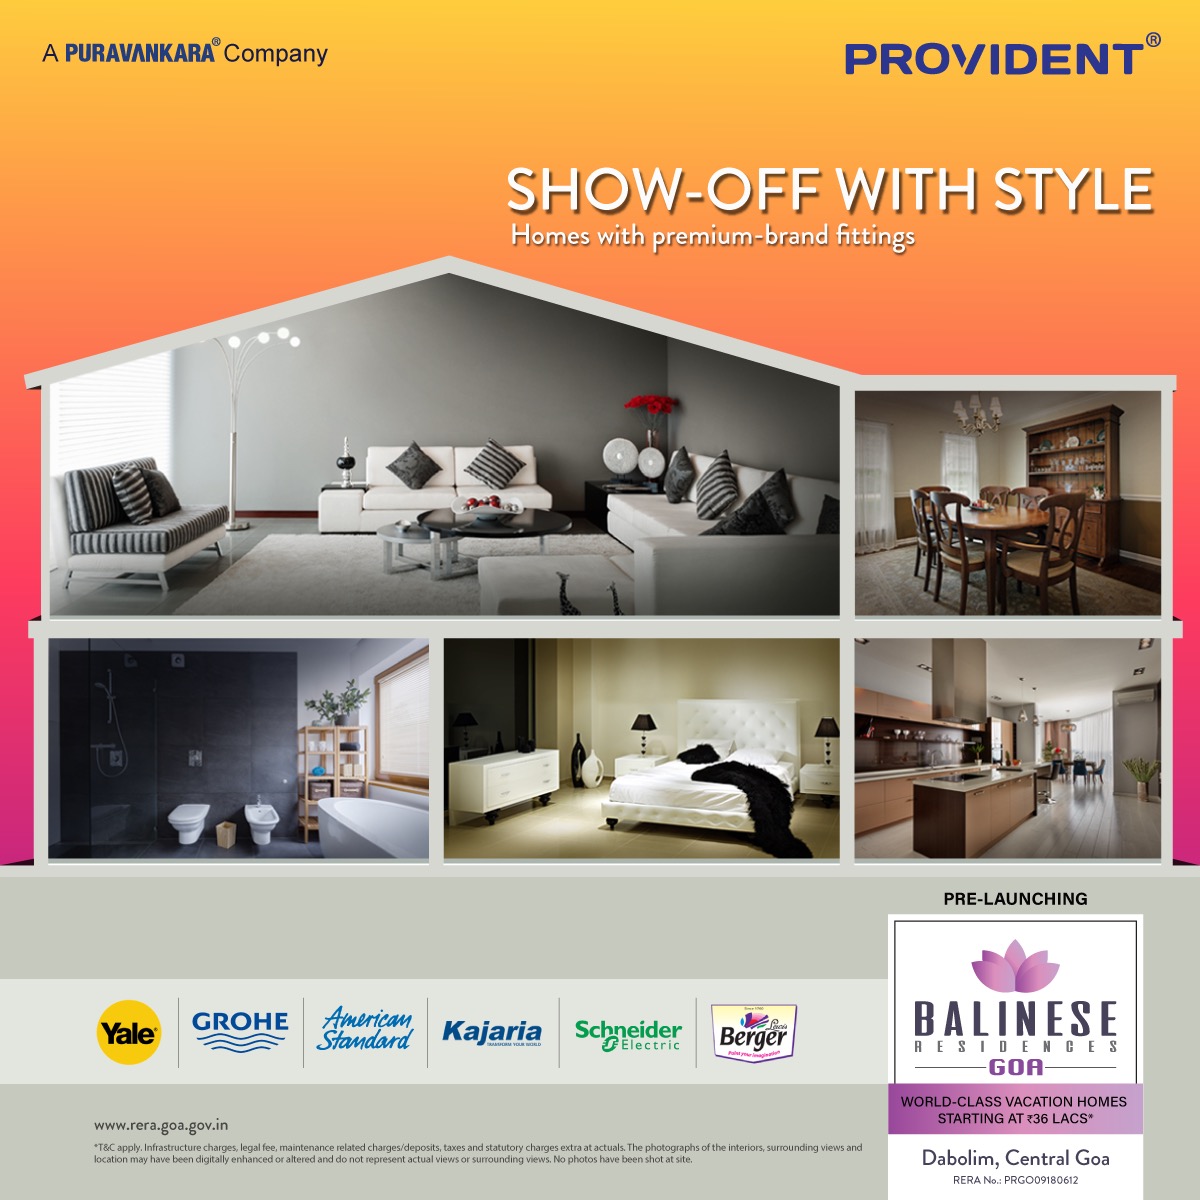 Provident Balinese Residences fitted with accessories from the best brands in the country Update